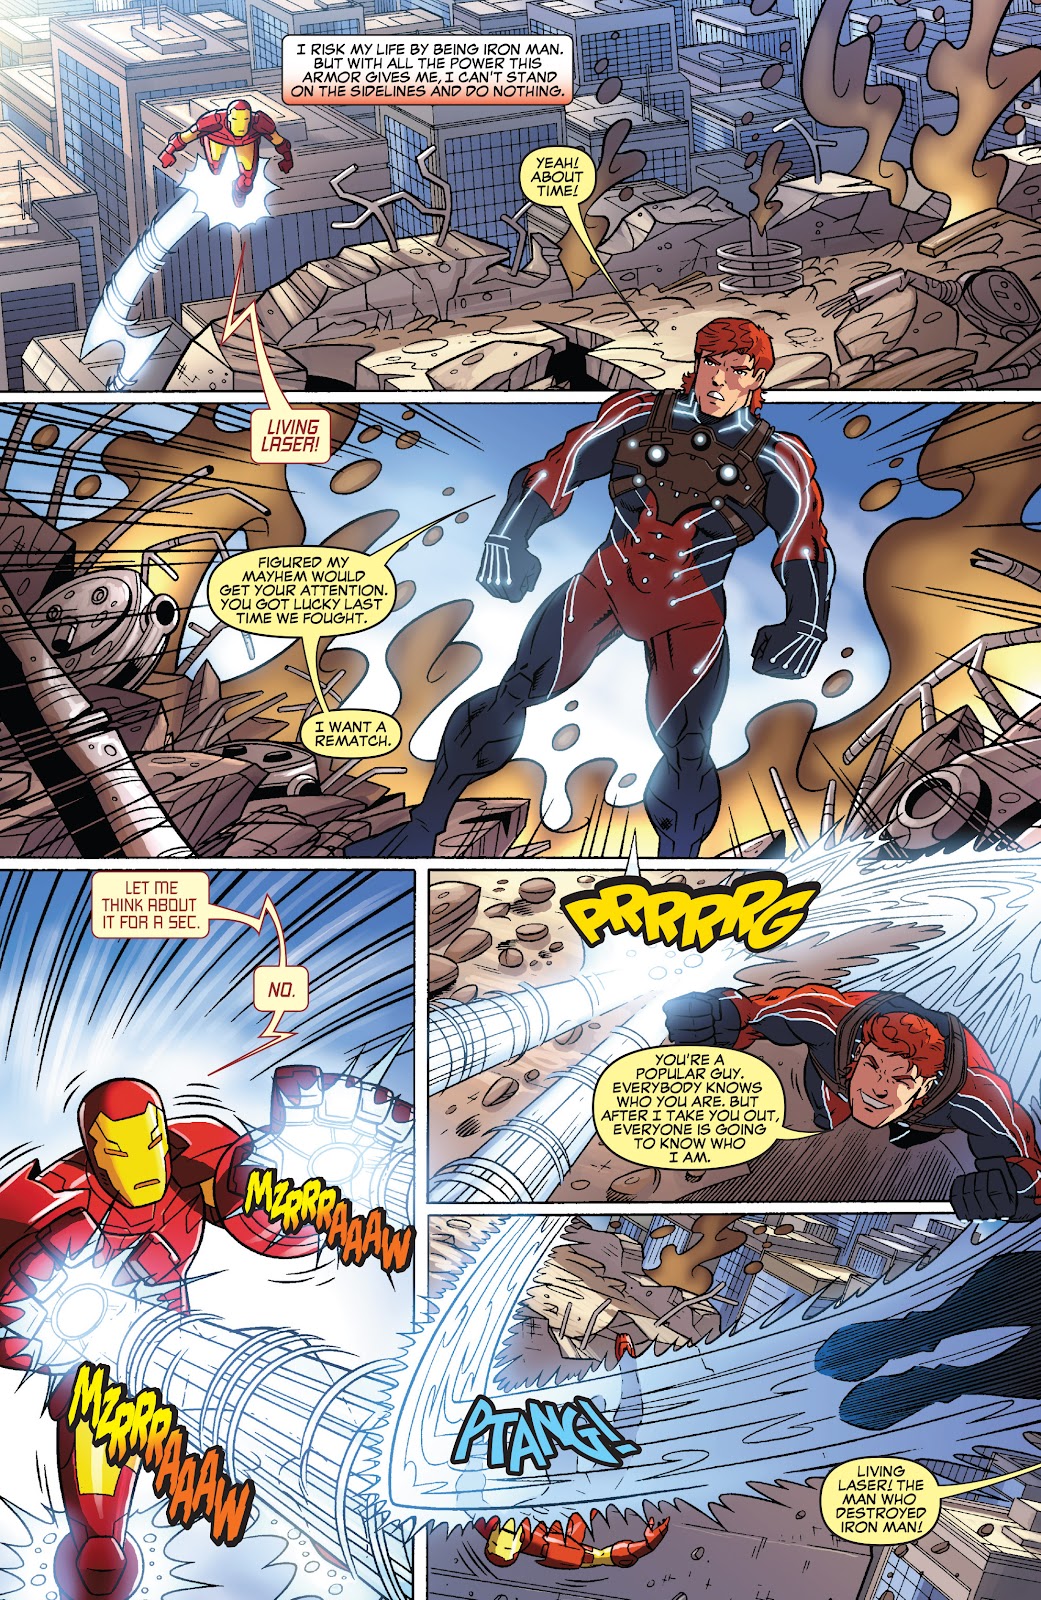 Iron Man Armored Adventures | Read Iron Man Armored Adventures comic online  in high quality. Read Full Comic online for free - Read comics online in  high quality .|viewcomiconline.com